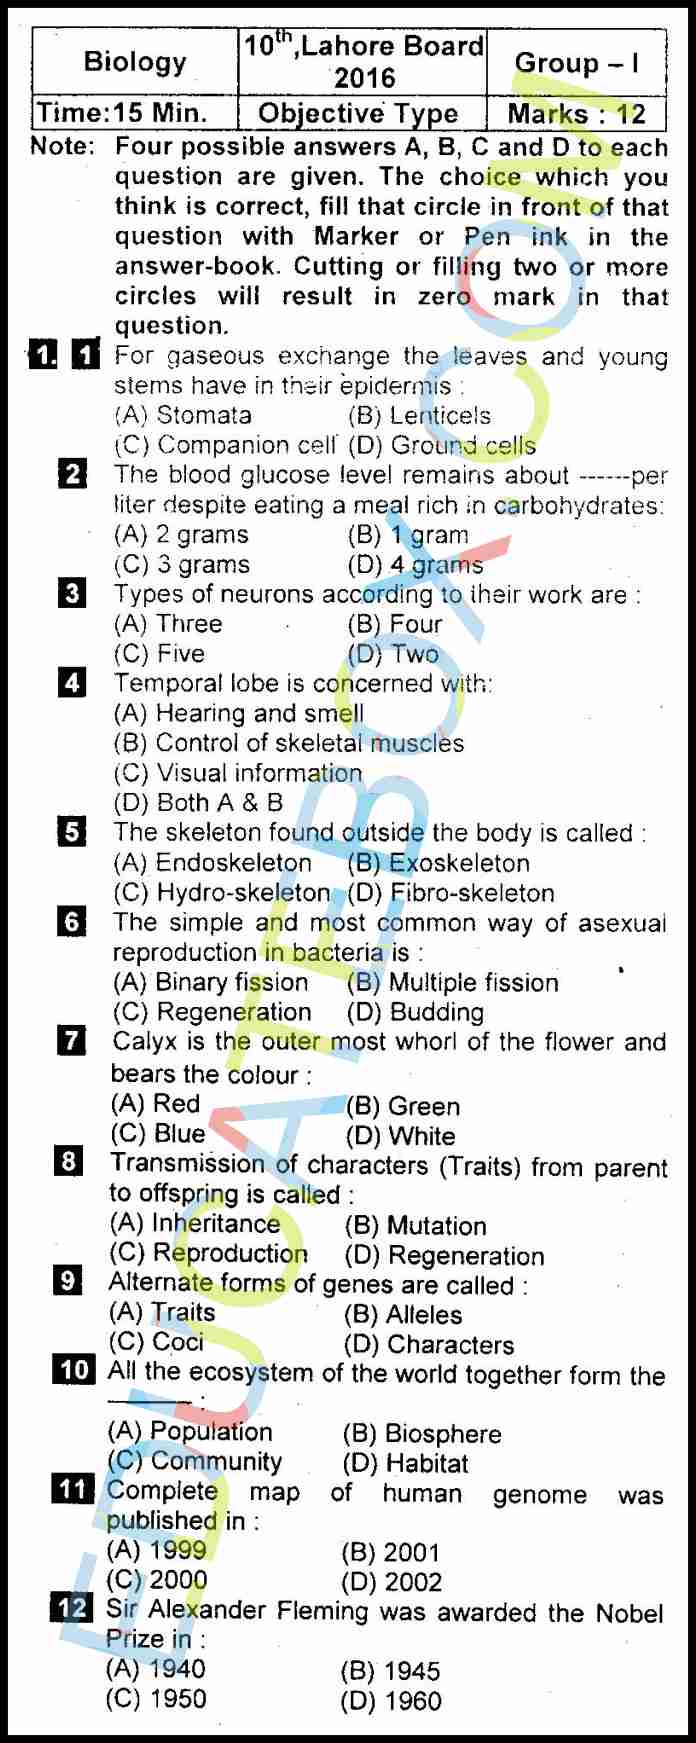 Past Paper Class 10 Biology Lahore Board 2016 Objective Type Group 1 (English Medium)